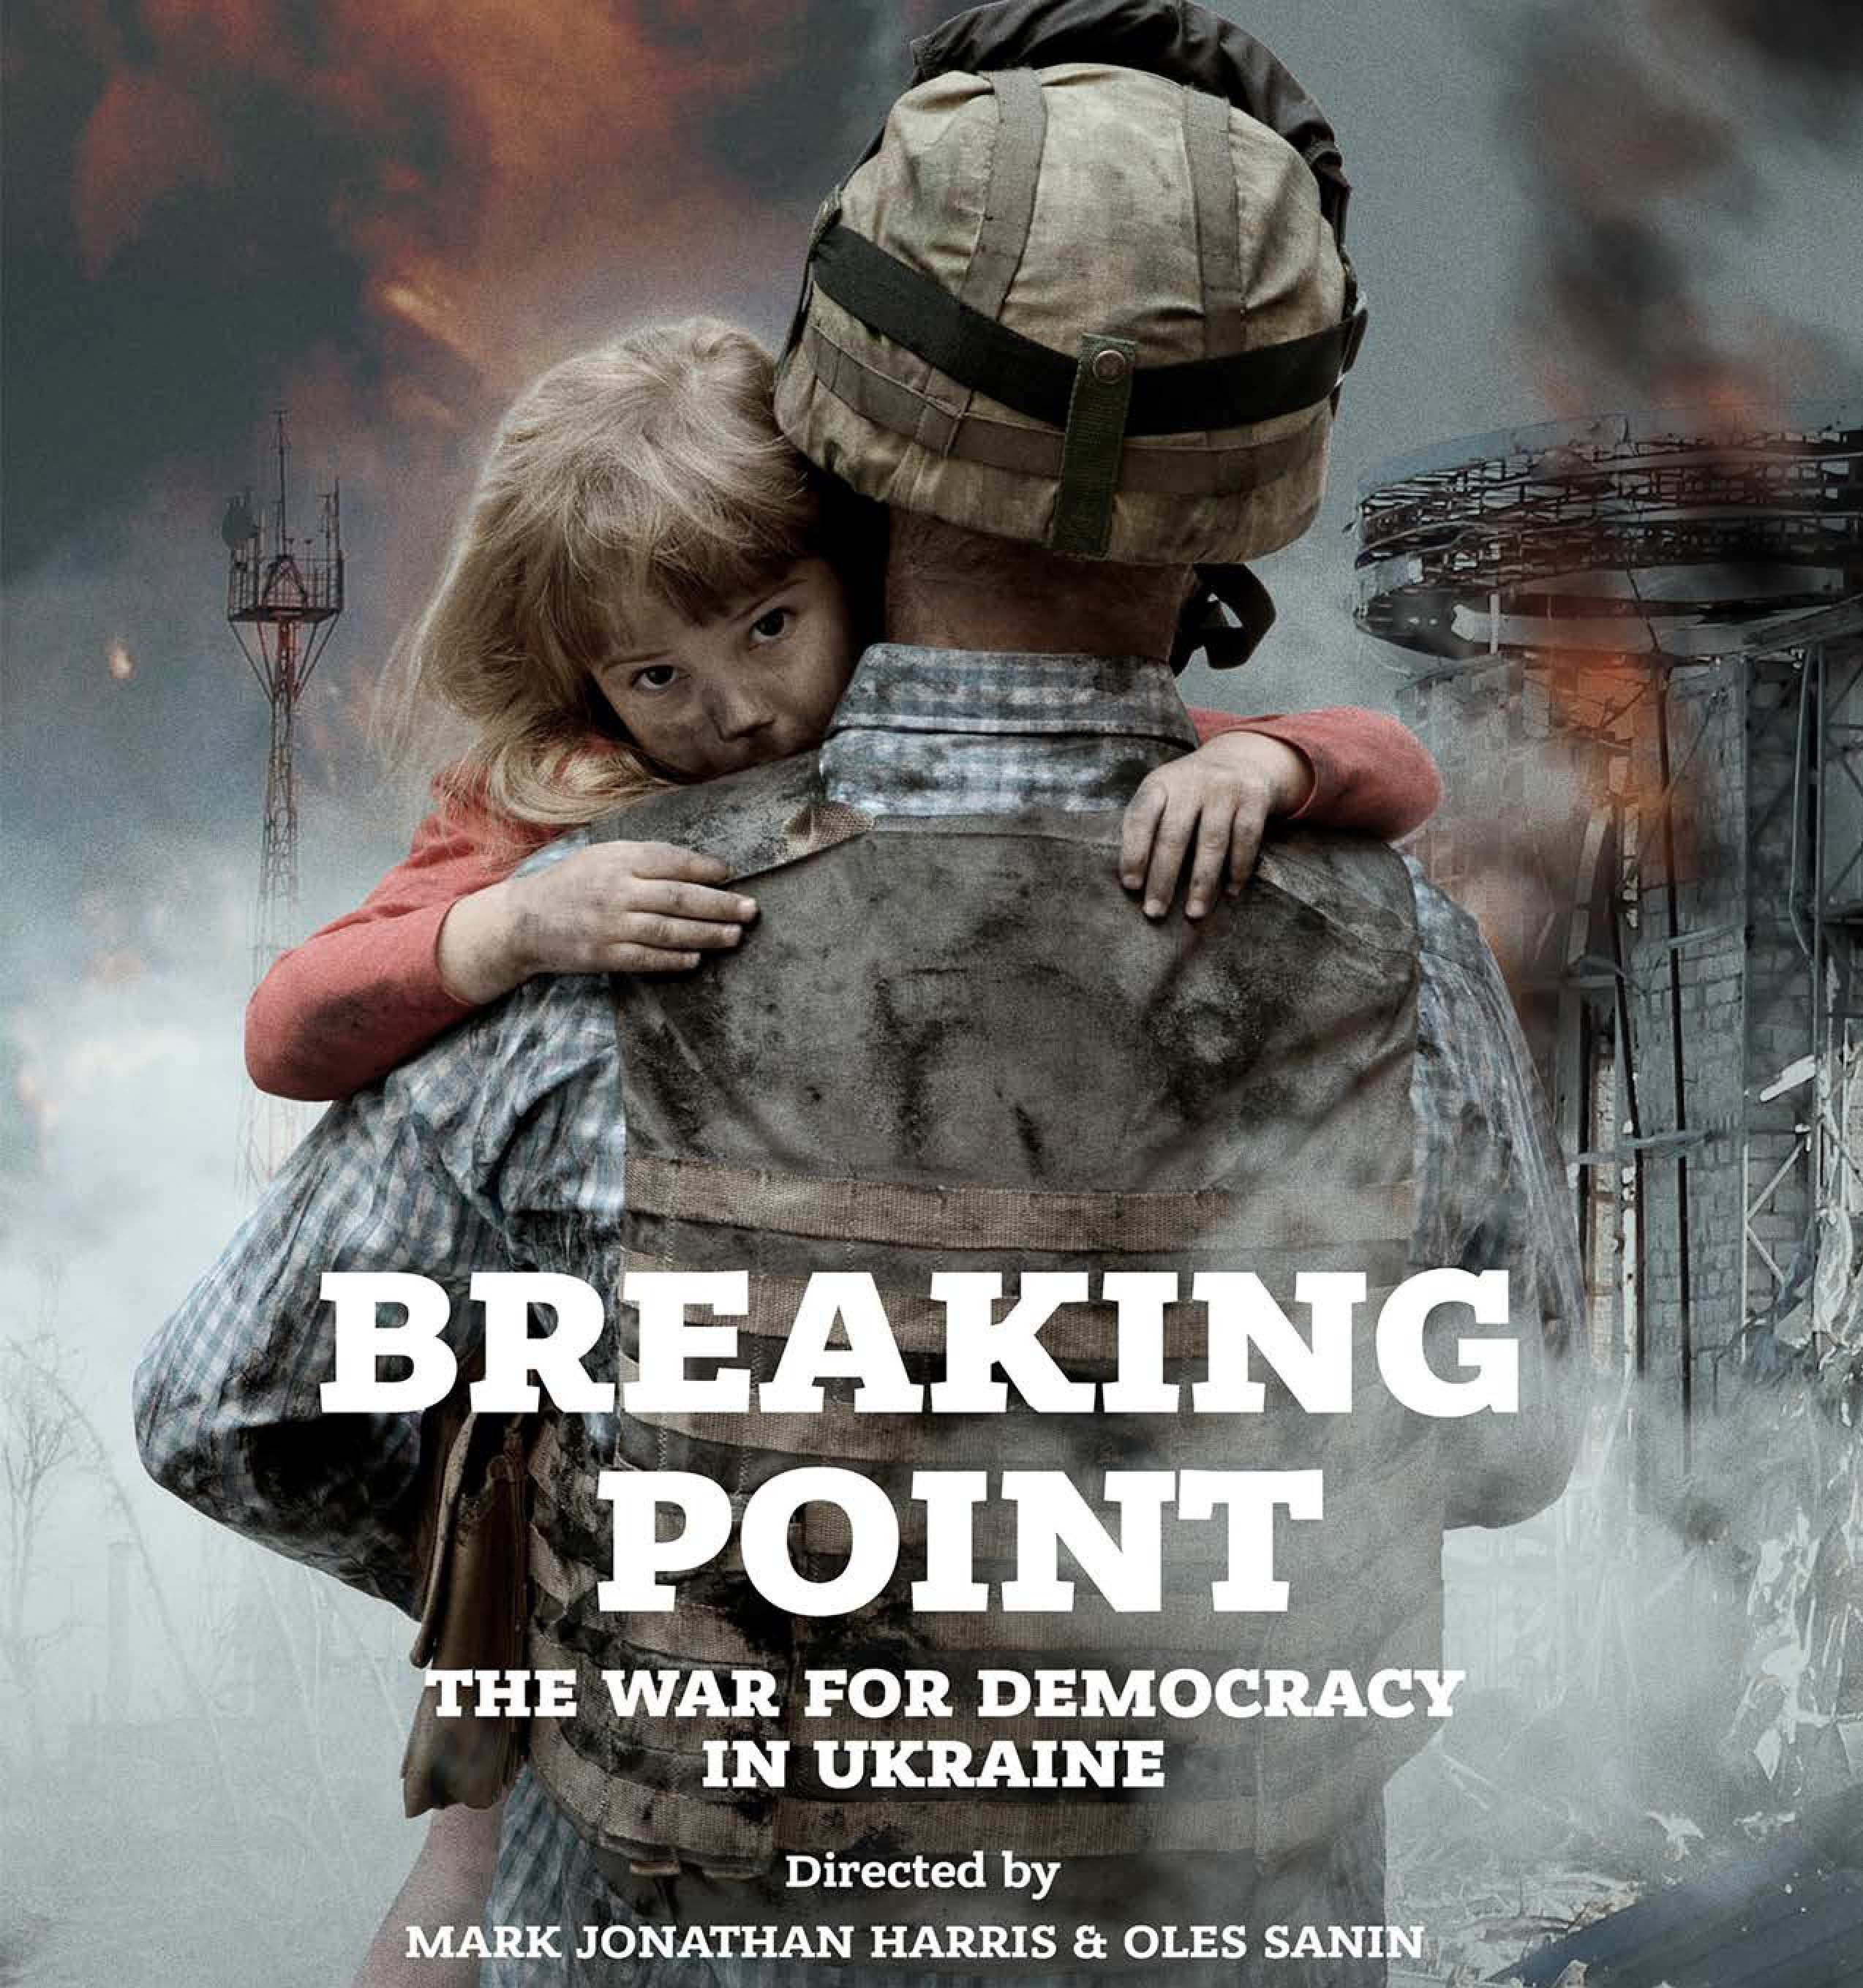 See the new film Breaking Point: The War for Democracy in Ukraine